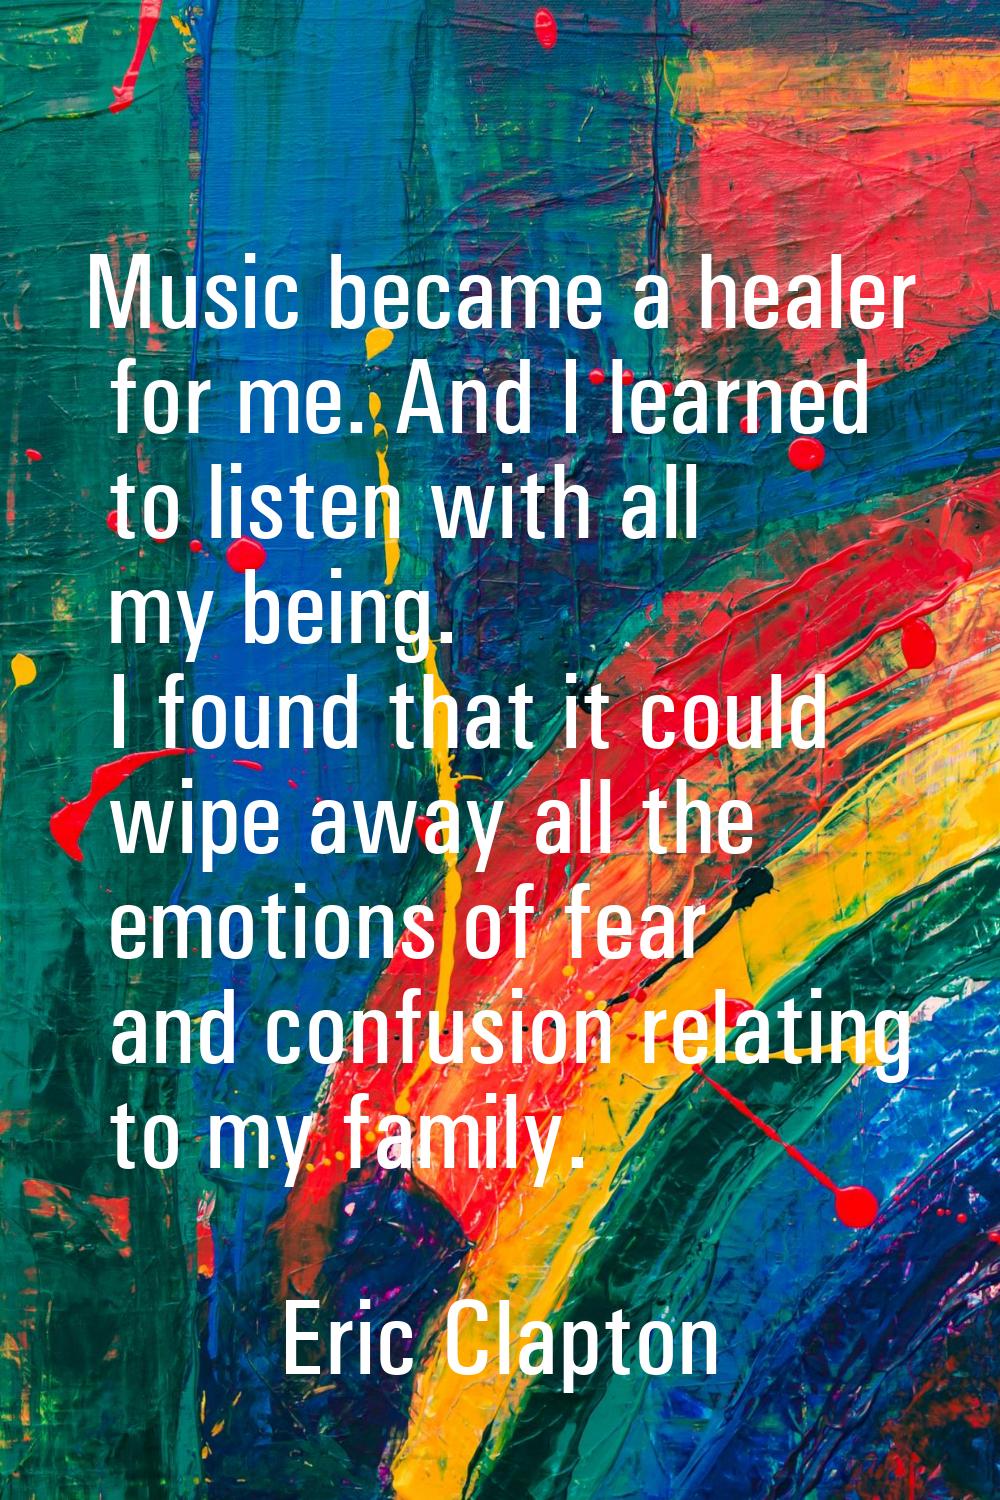 Music became a healer for me. And I learned to listen with all my being. I found that it could wipe